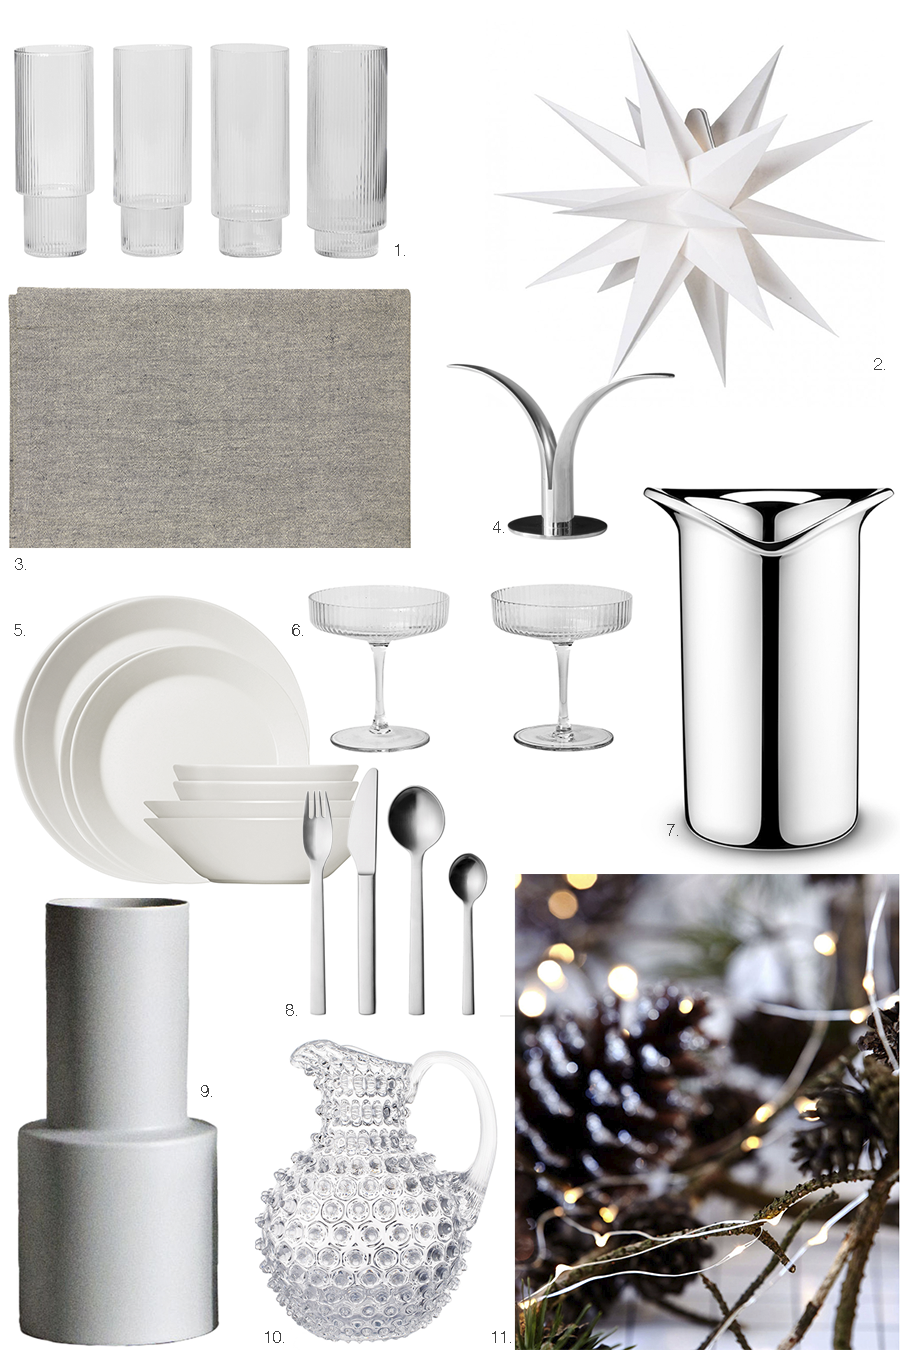 GET THE LOOK // EVERYTHING YOU NEED FOR THE NEW YEARS TABLE